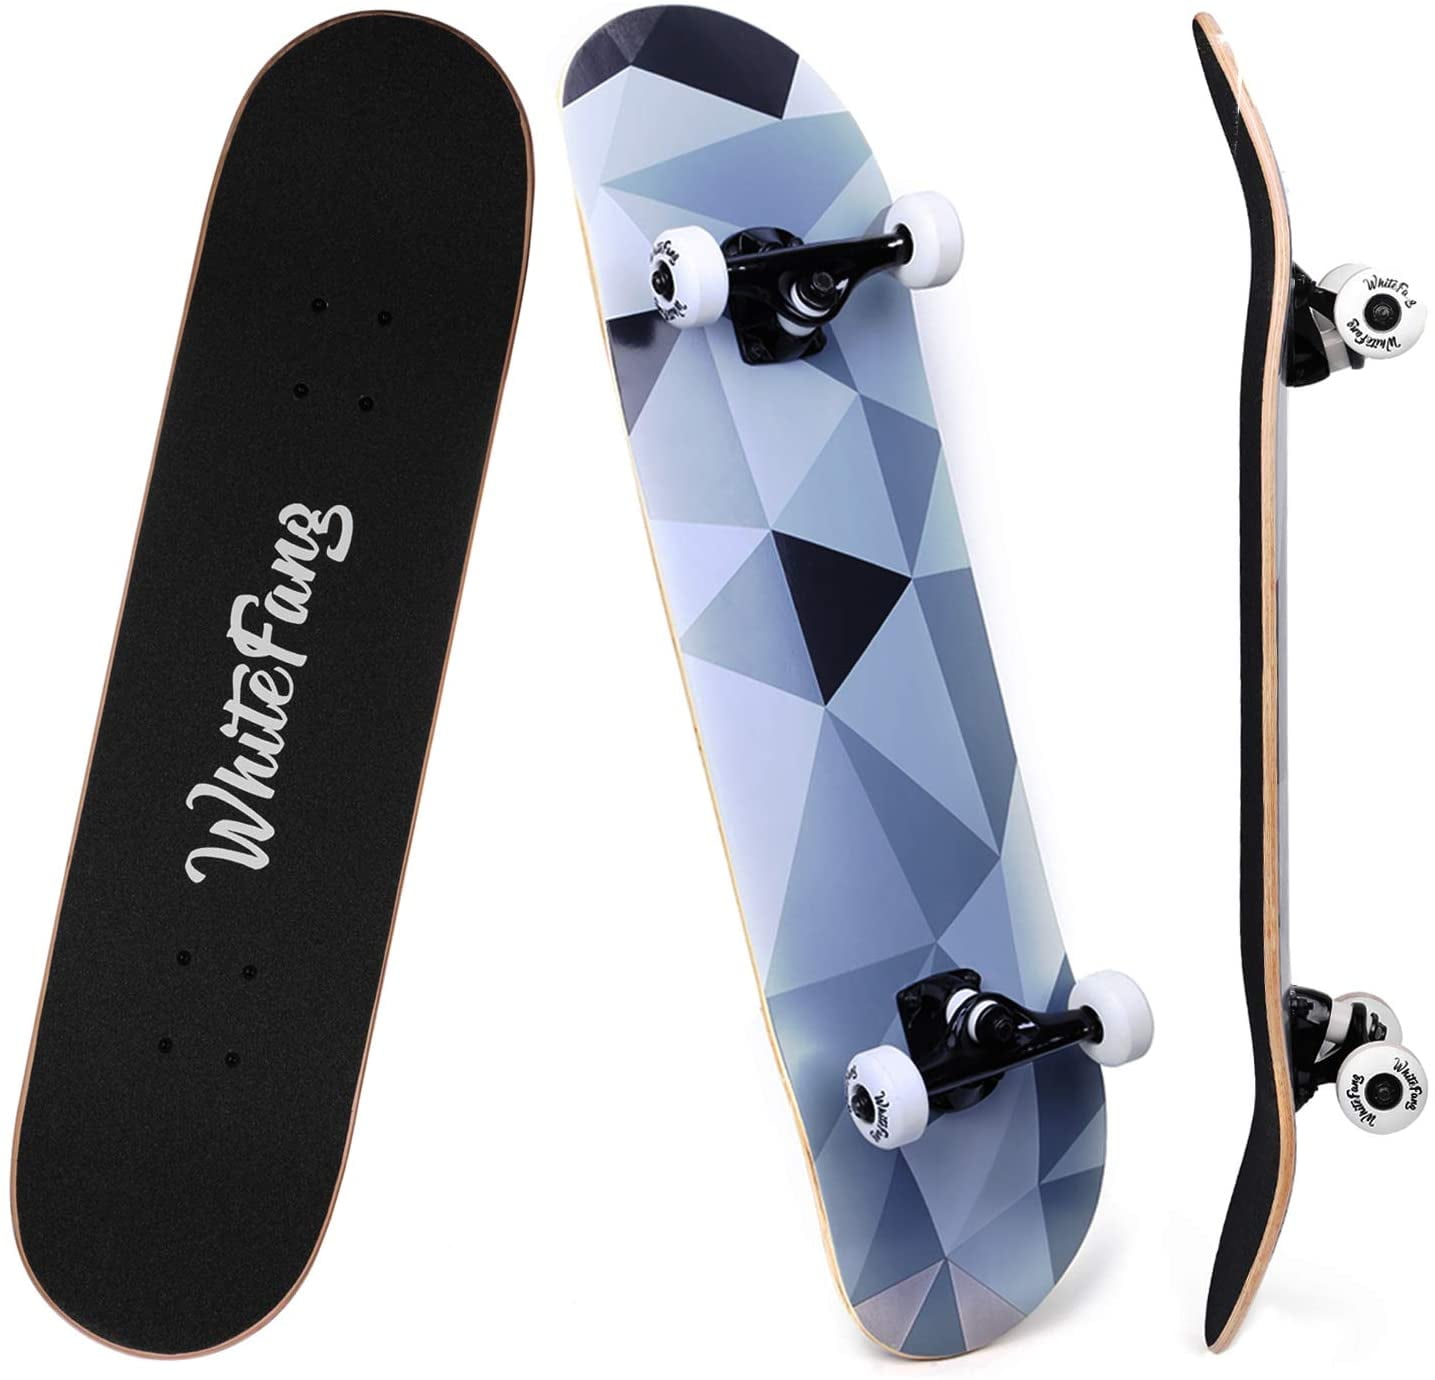 Playshion 31 Inch Trick Skateboard Complete for Kids and Adults Beginners Black 